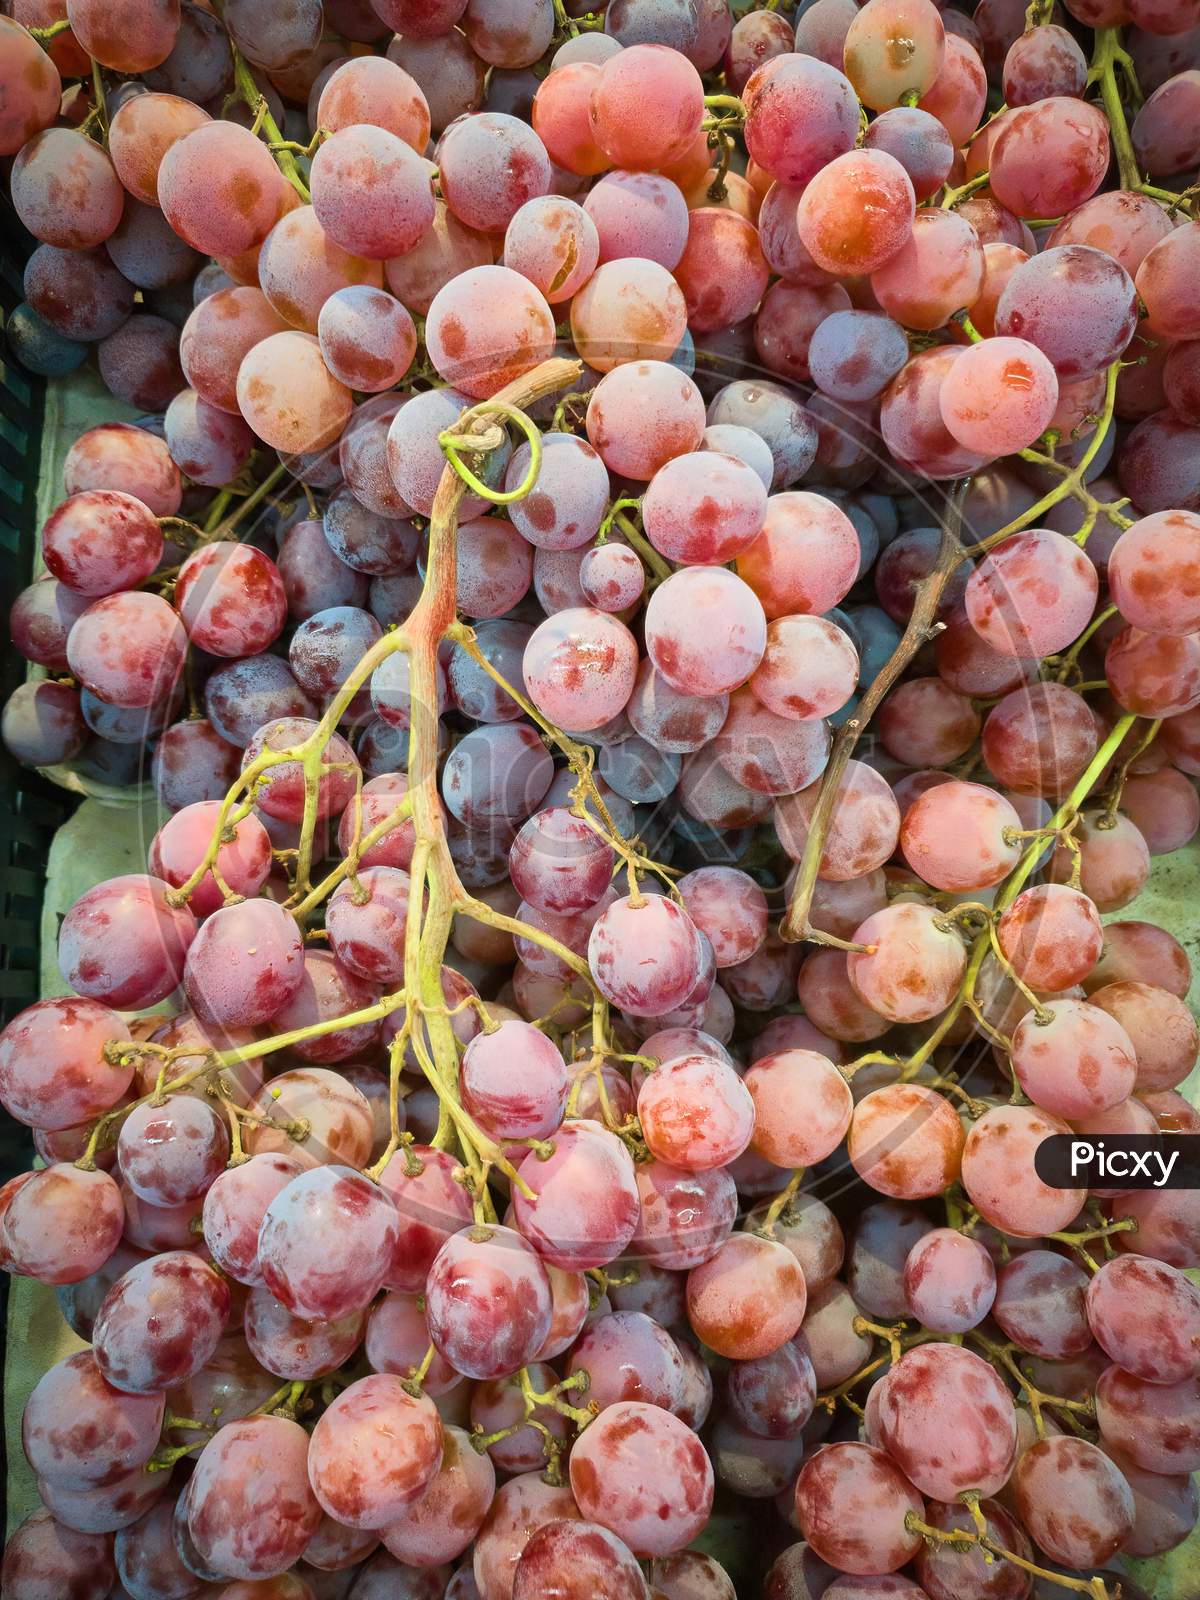 Red Grapes For Sale In Market